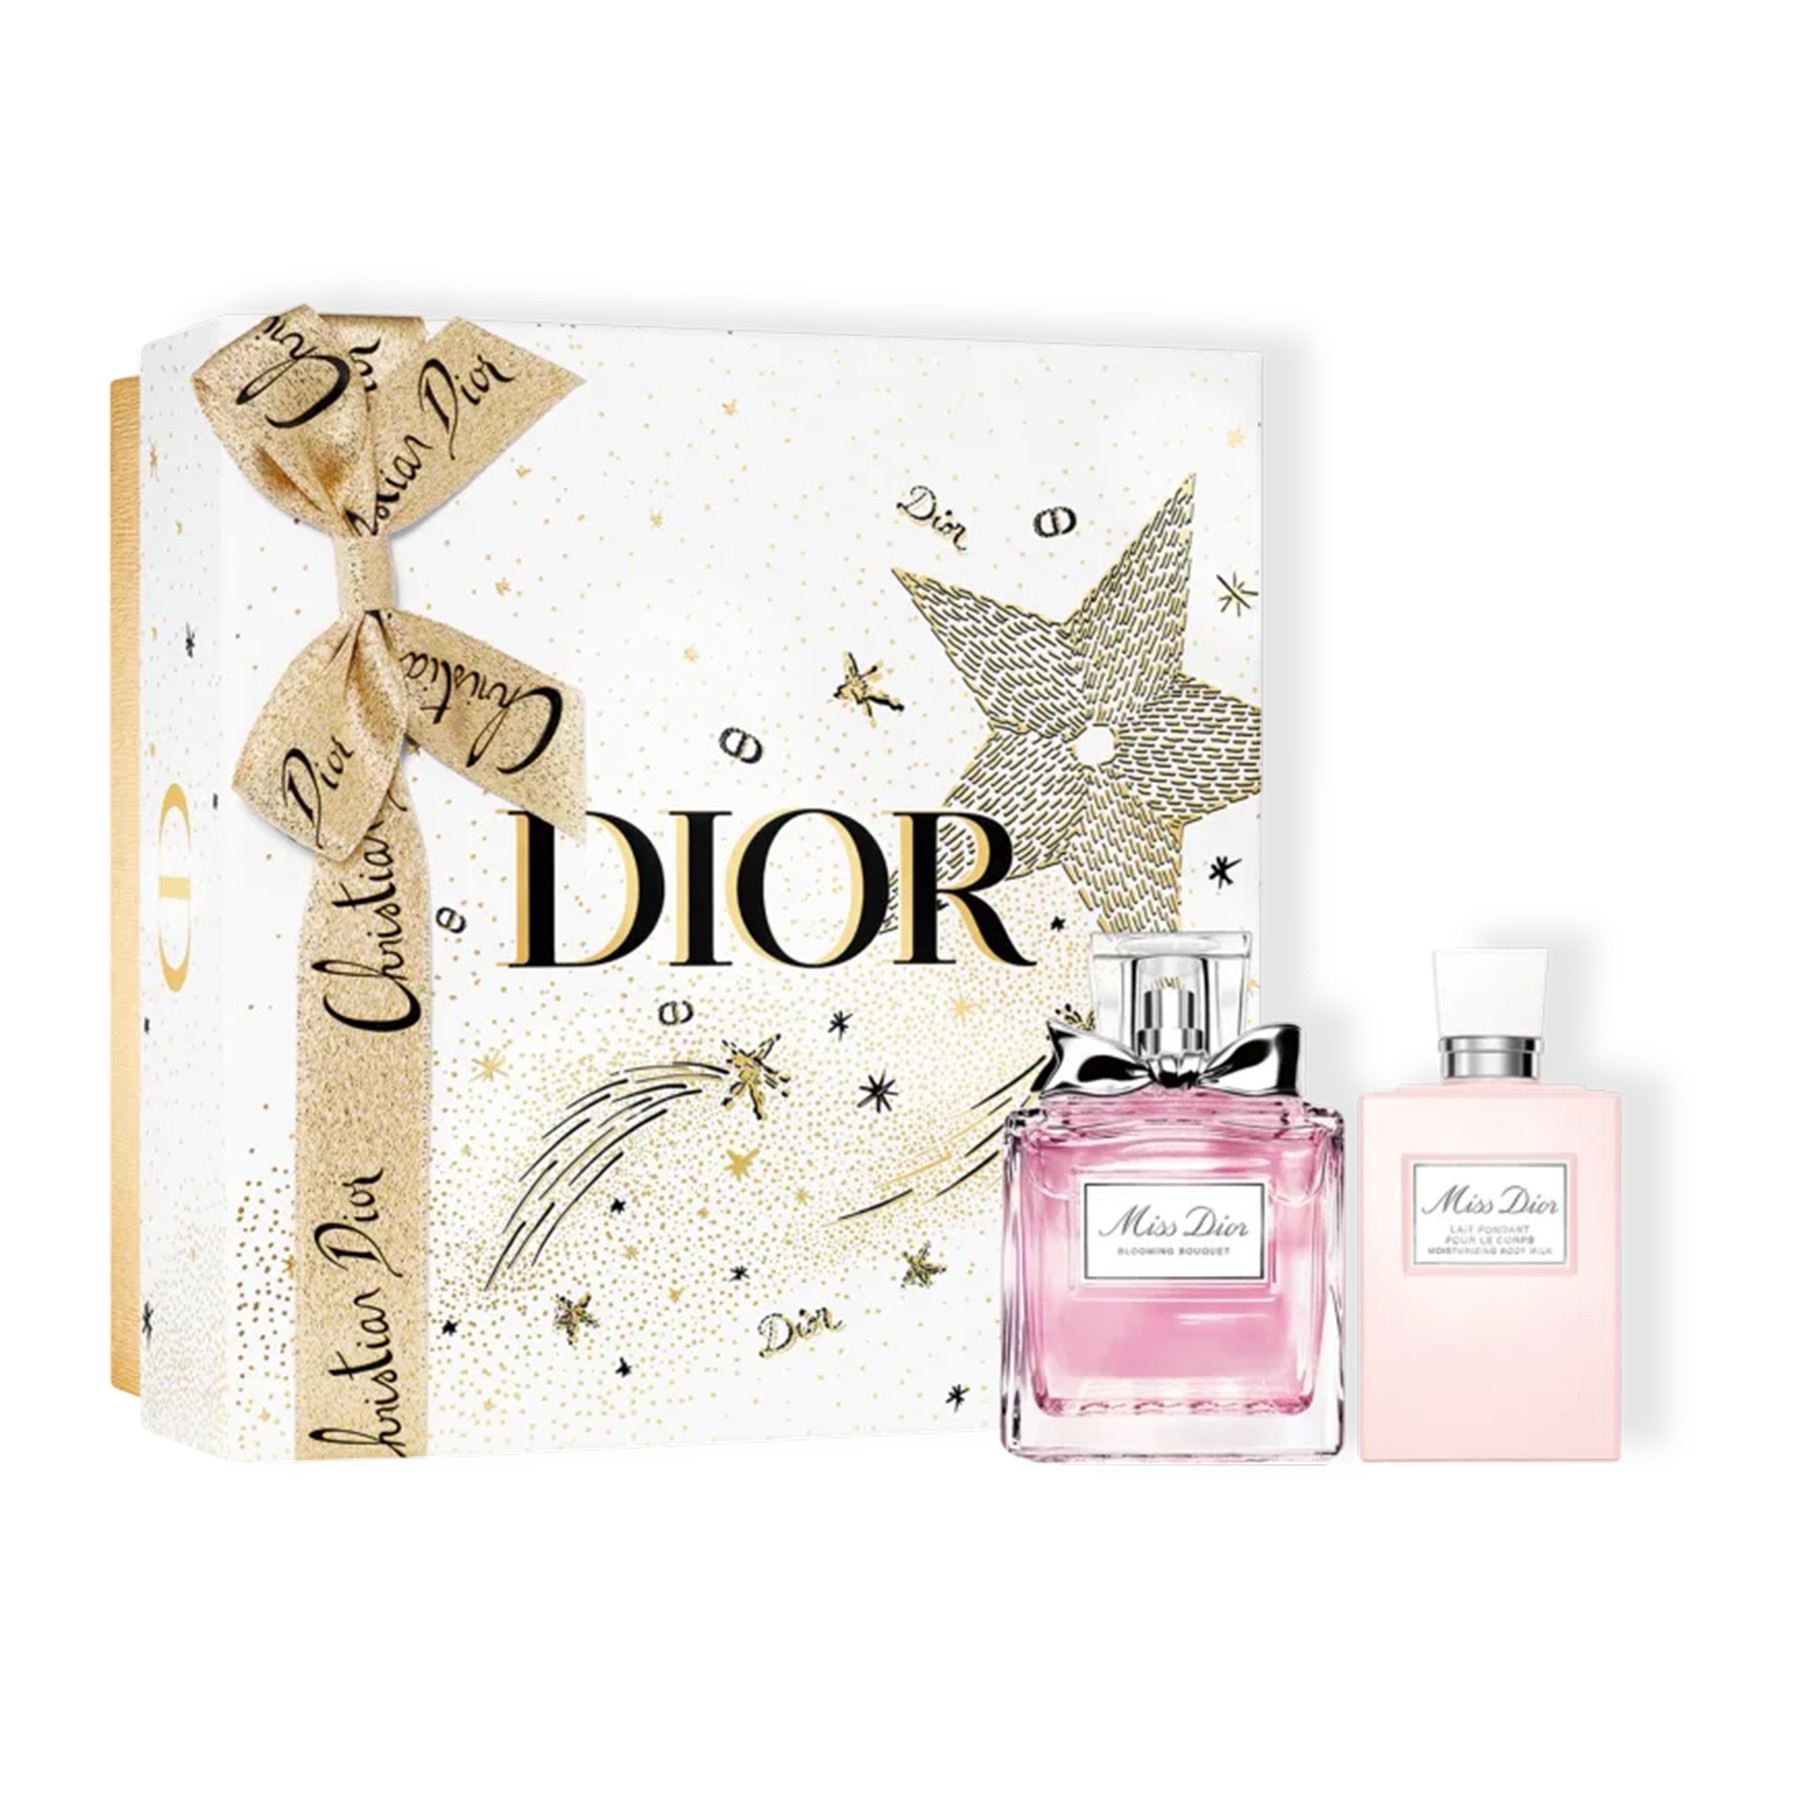 AMOSTRA DIOR MISS DIOR BLOOMING BOUQUET EDT FEMININO 1 ML  Champs Store